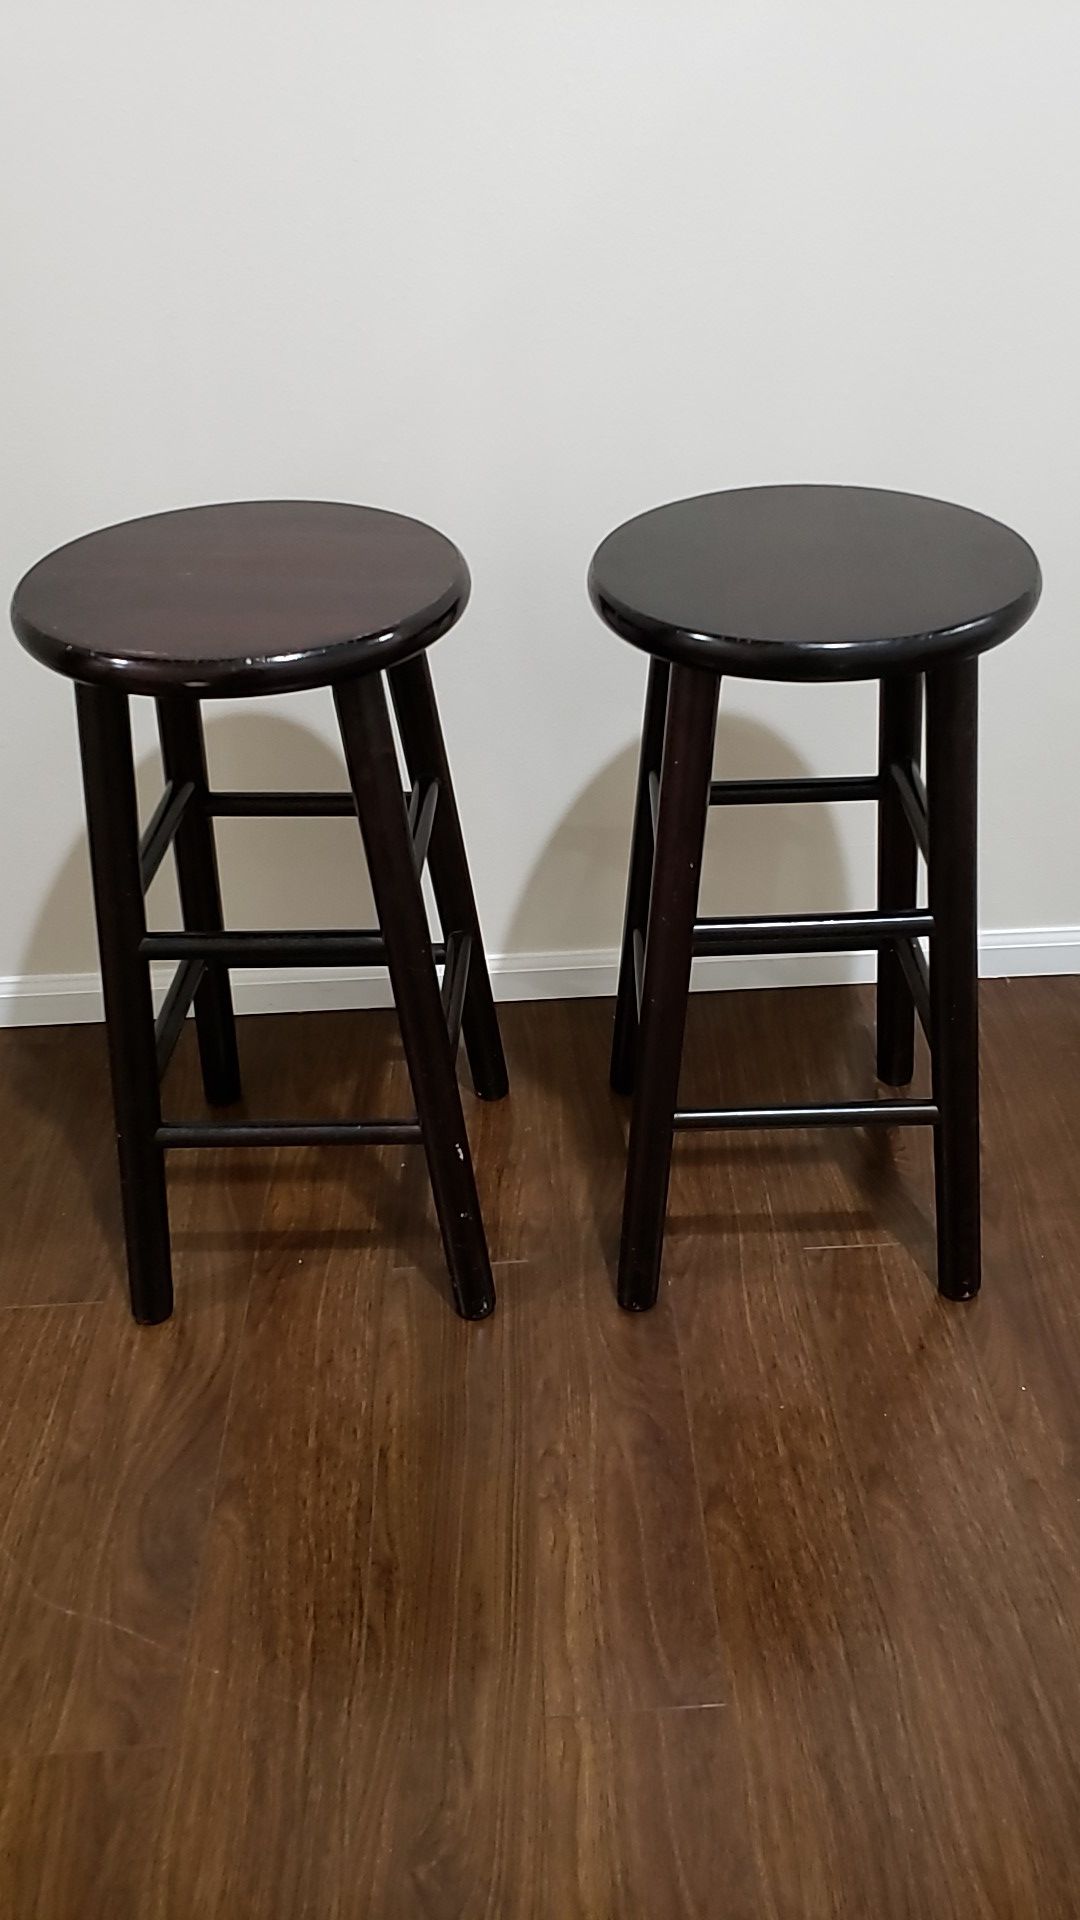 Two stools 25 in tall